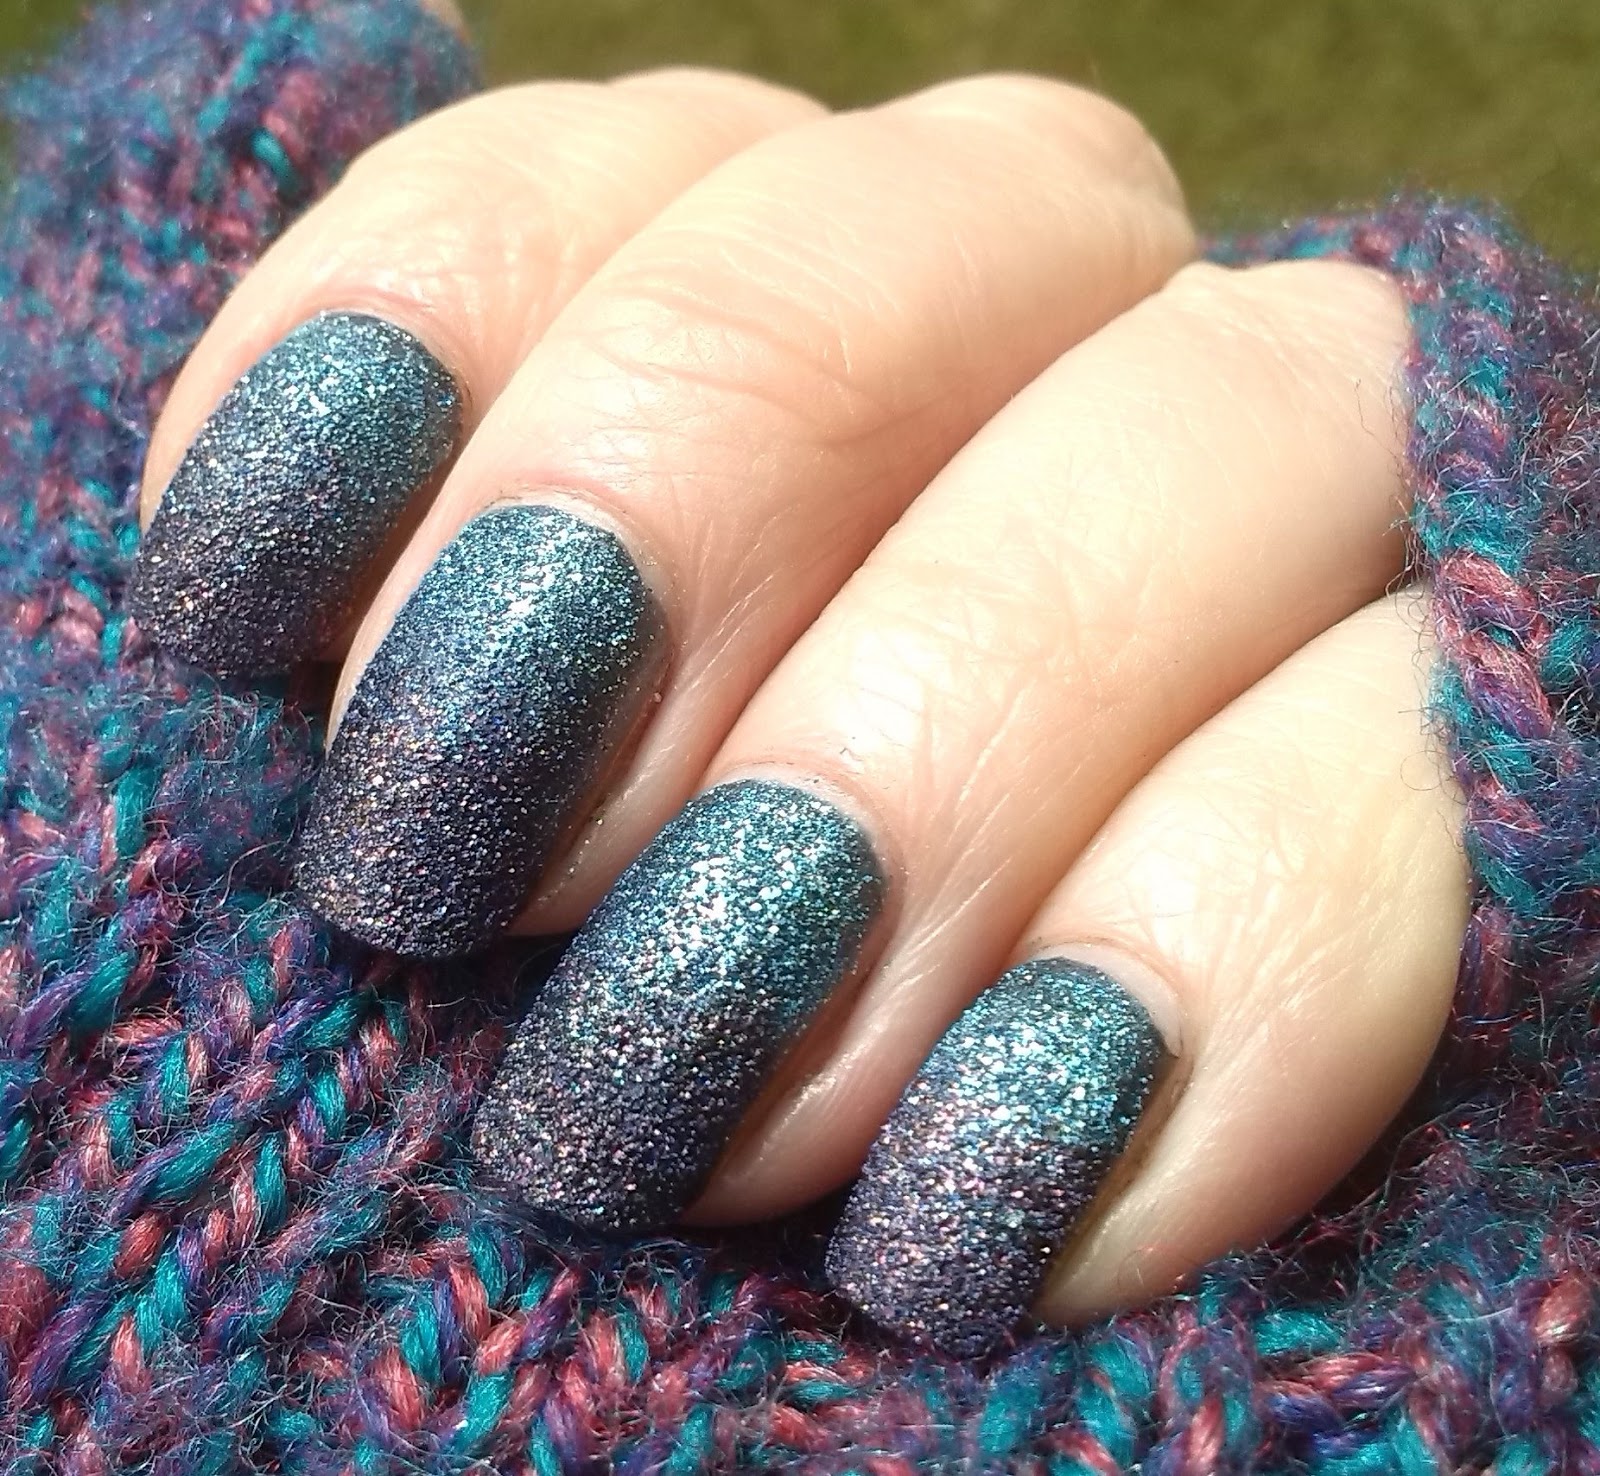 Avon Stardust Polished Plum and Teal Glitter 